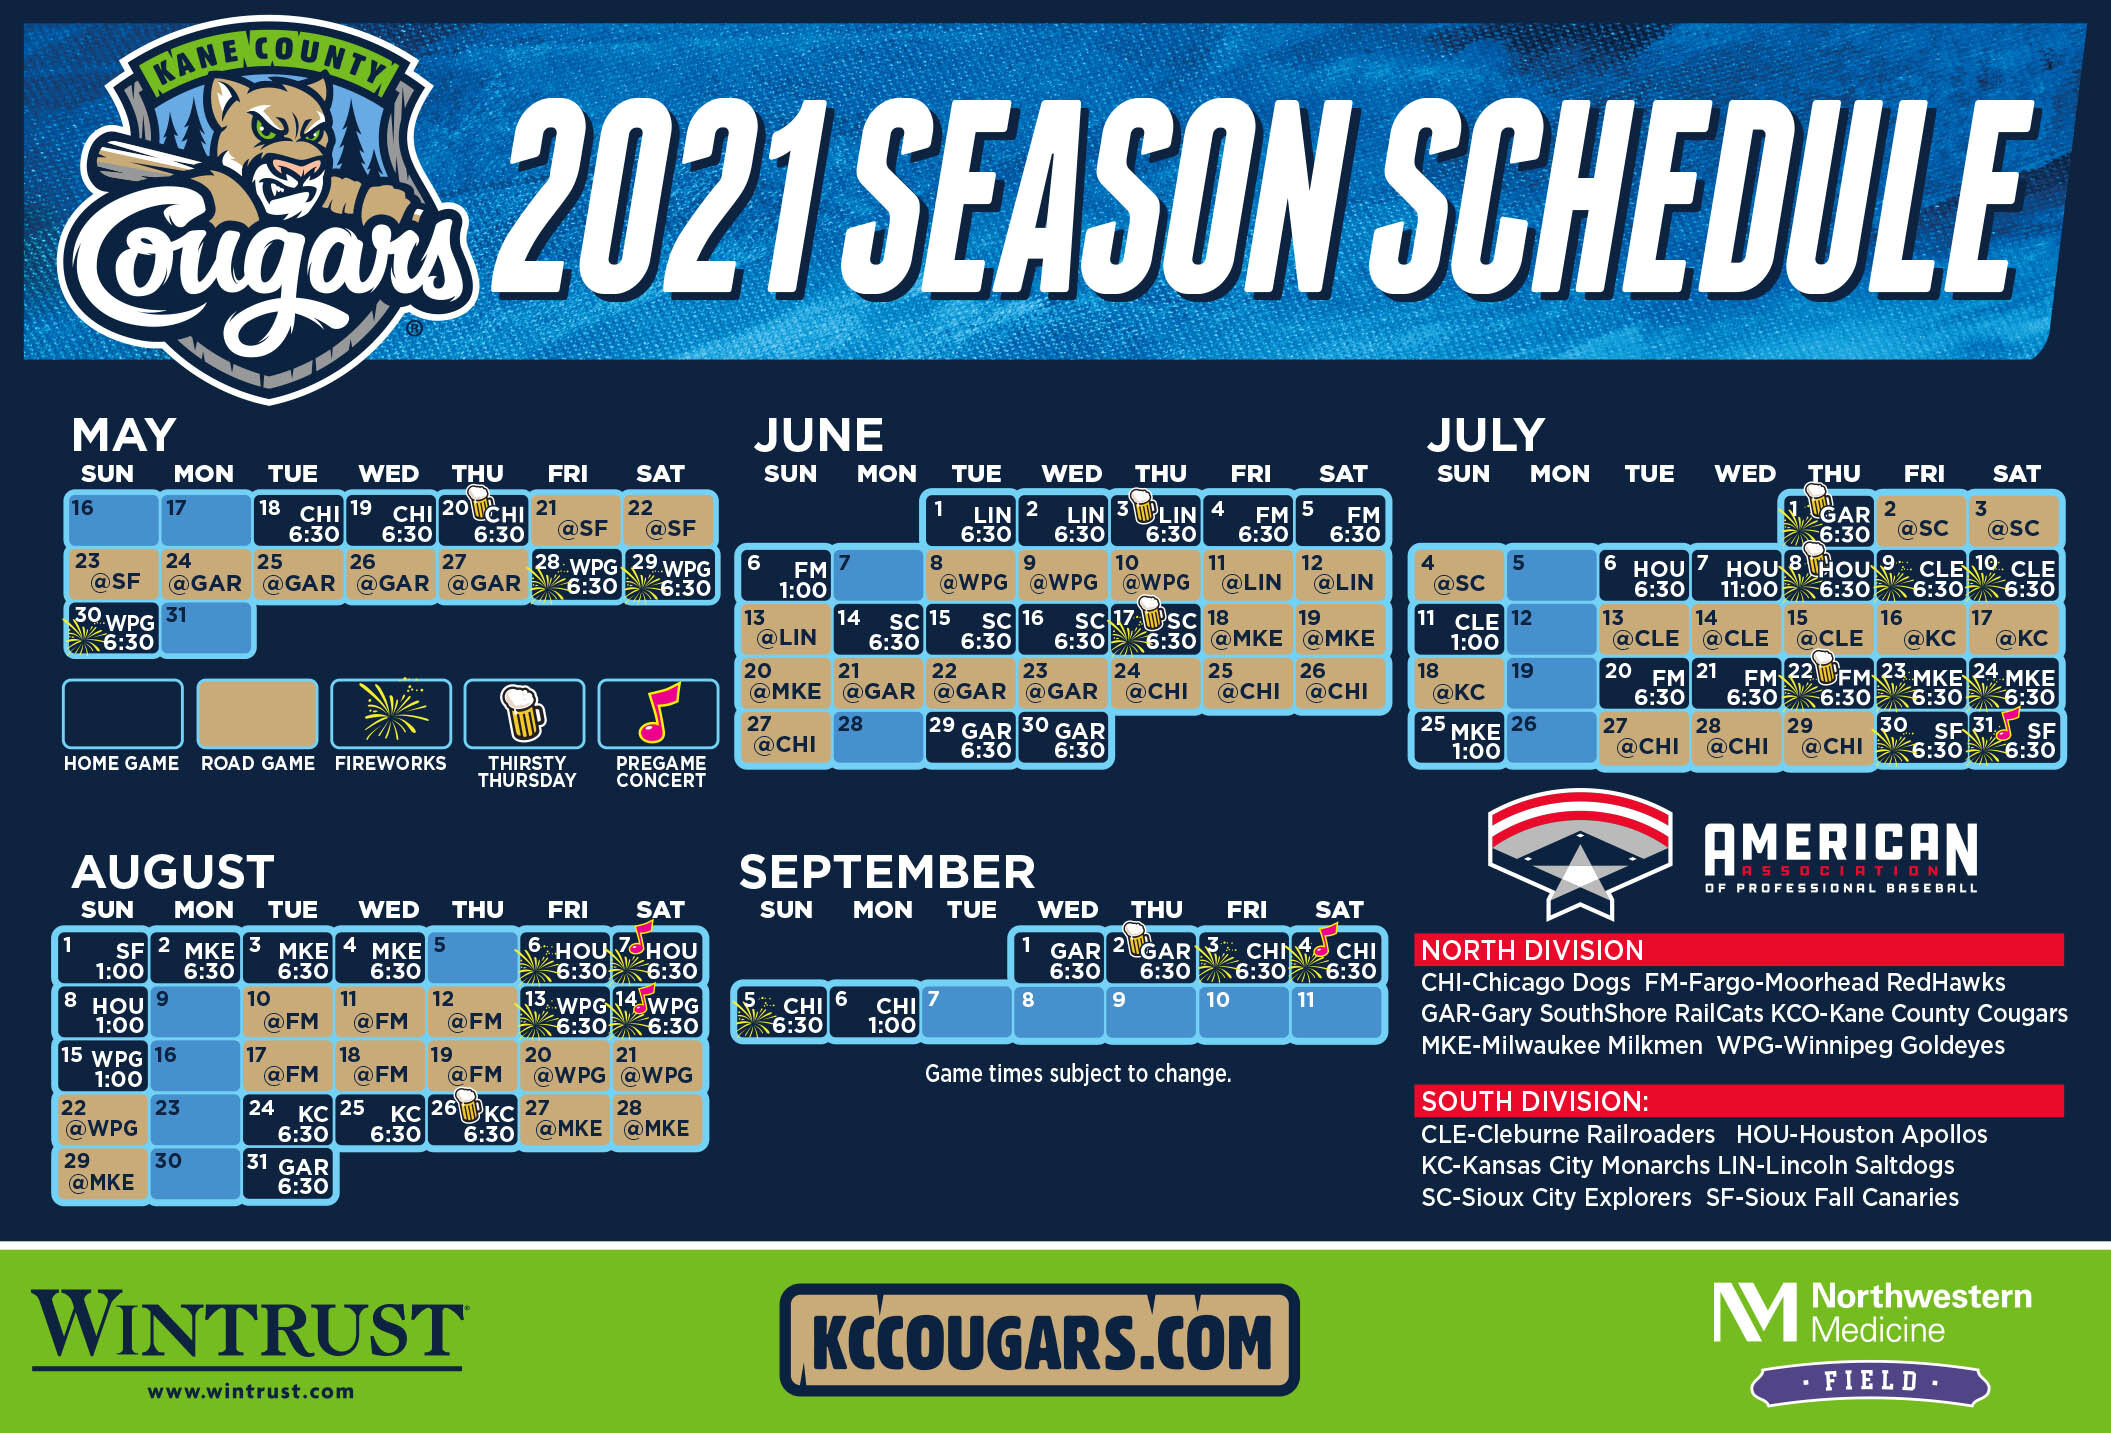 Kane County Cougars Schedule 2022 2021 Schedule Released! — Kane County Cougars